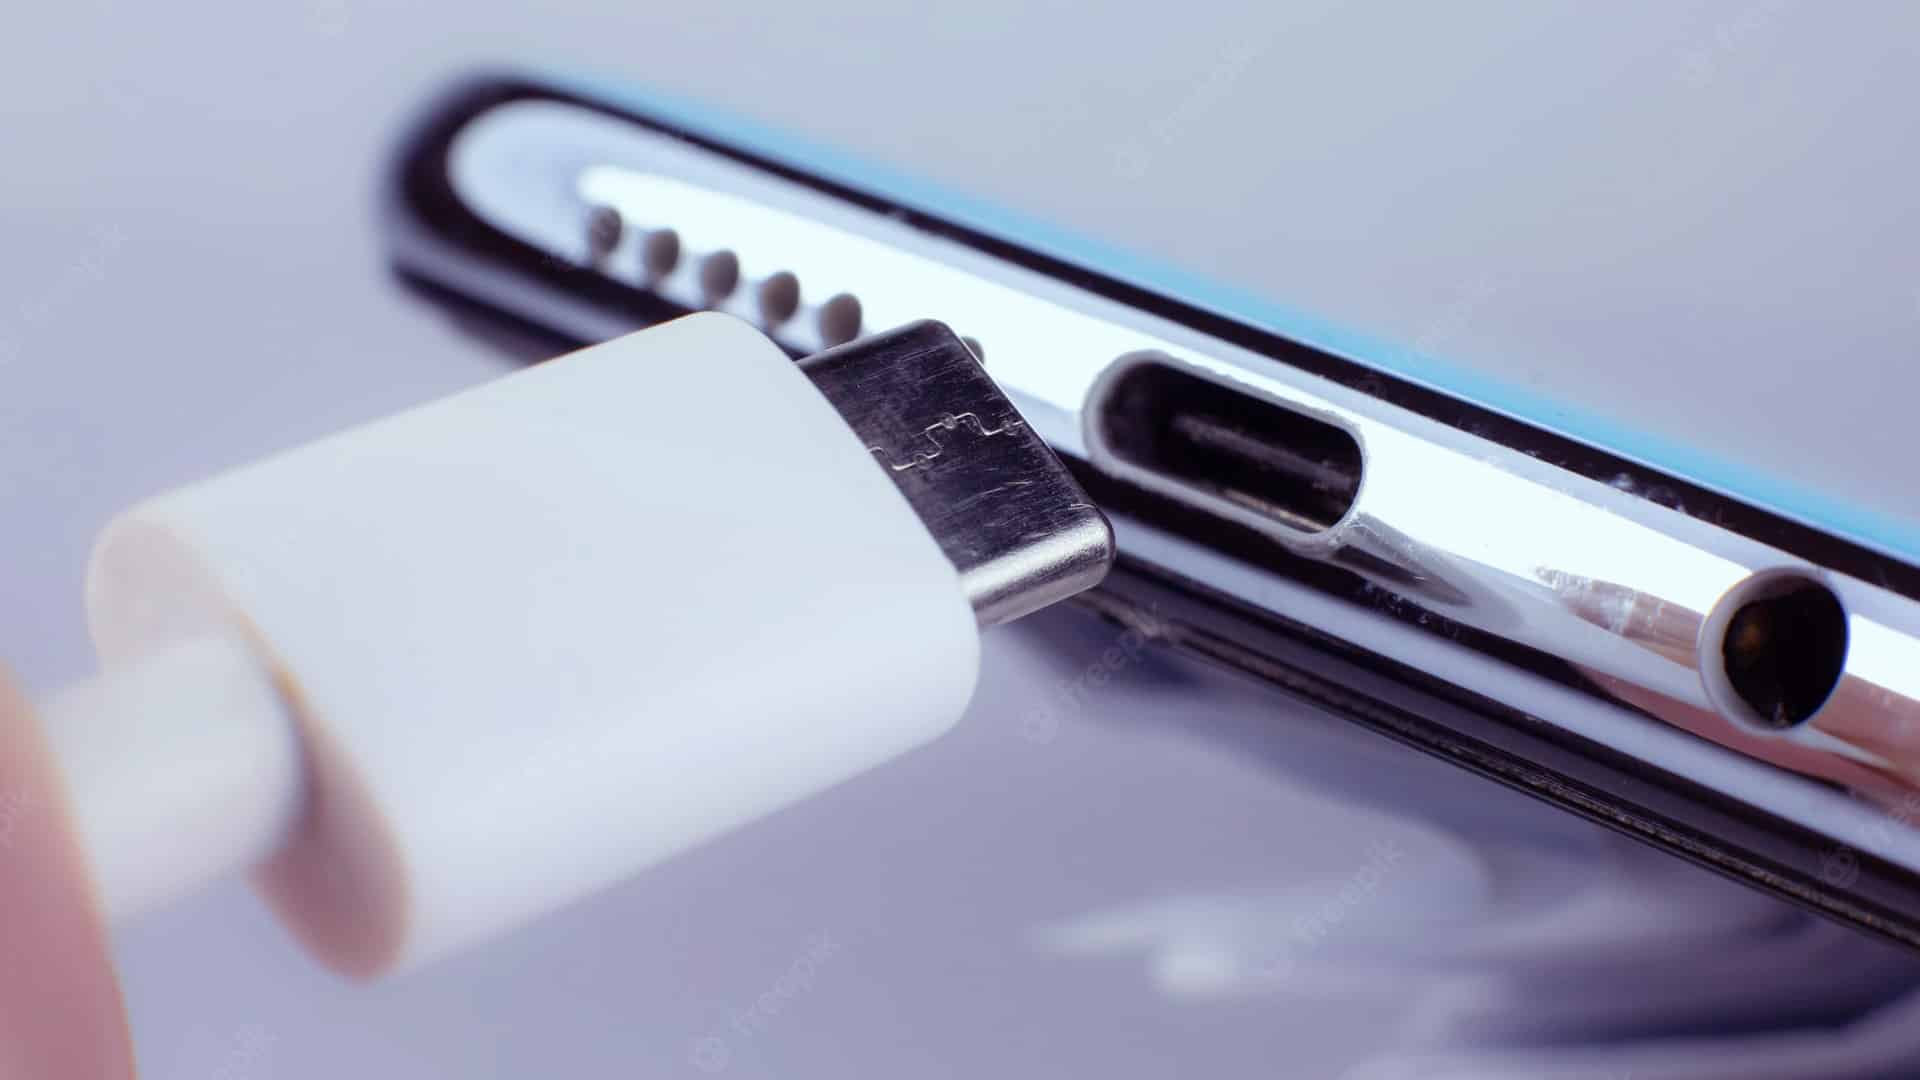 BIS comes out with standards for USB Type-C charging port